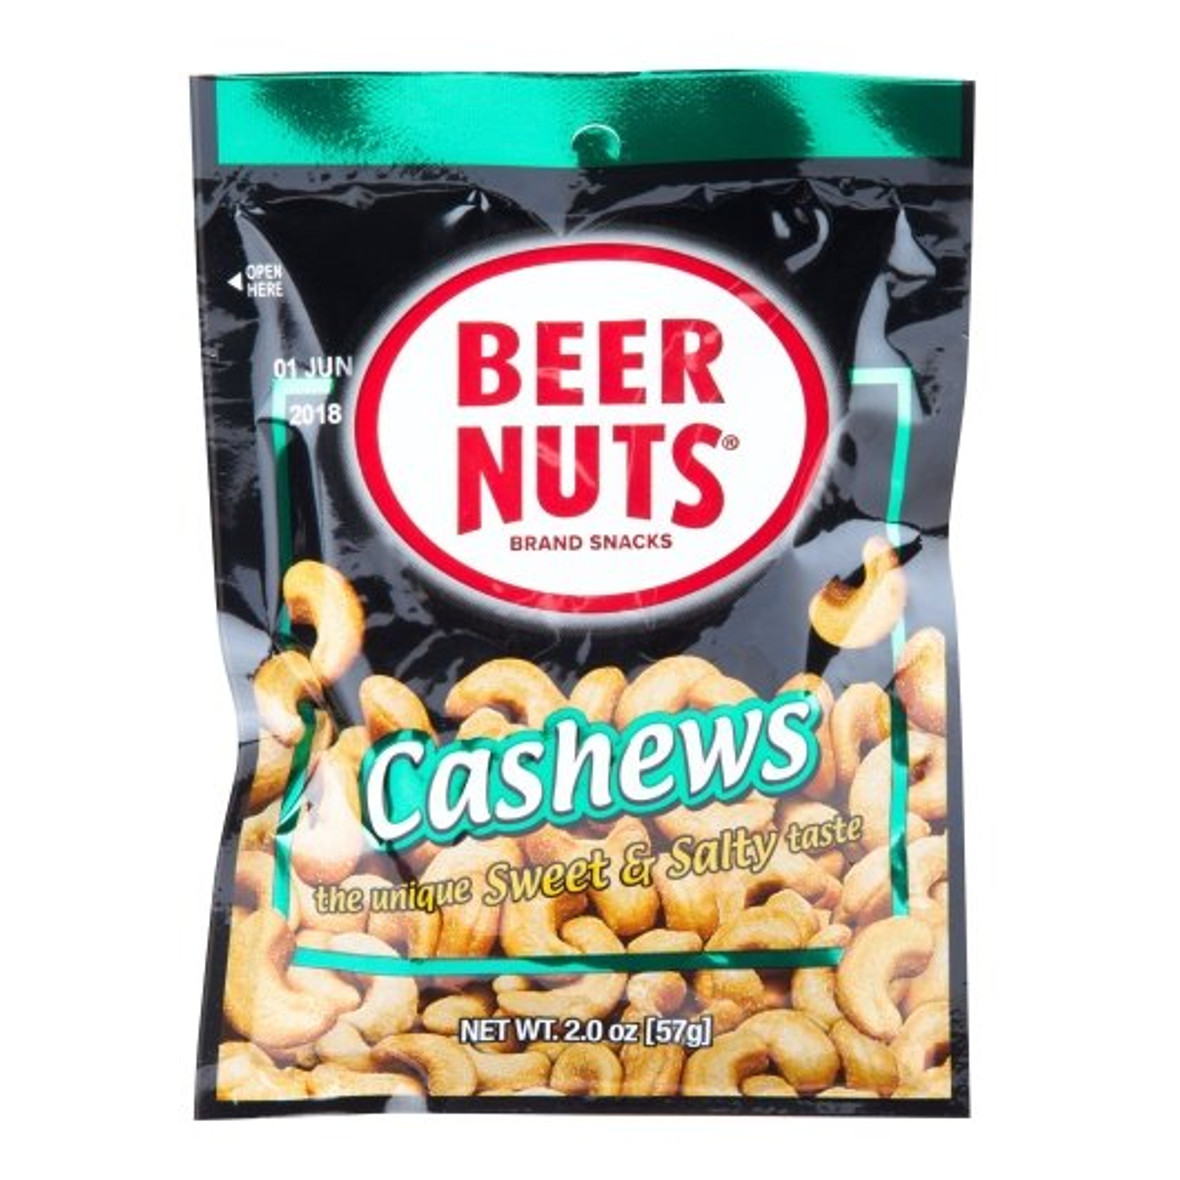 Beer Nuts Sweet And Salty Cashew, 2 Ounces, 12 Per Box, 4 Per Case